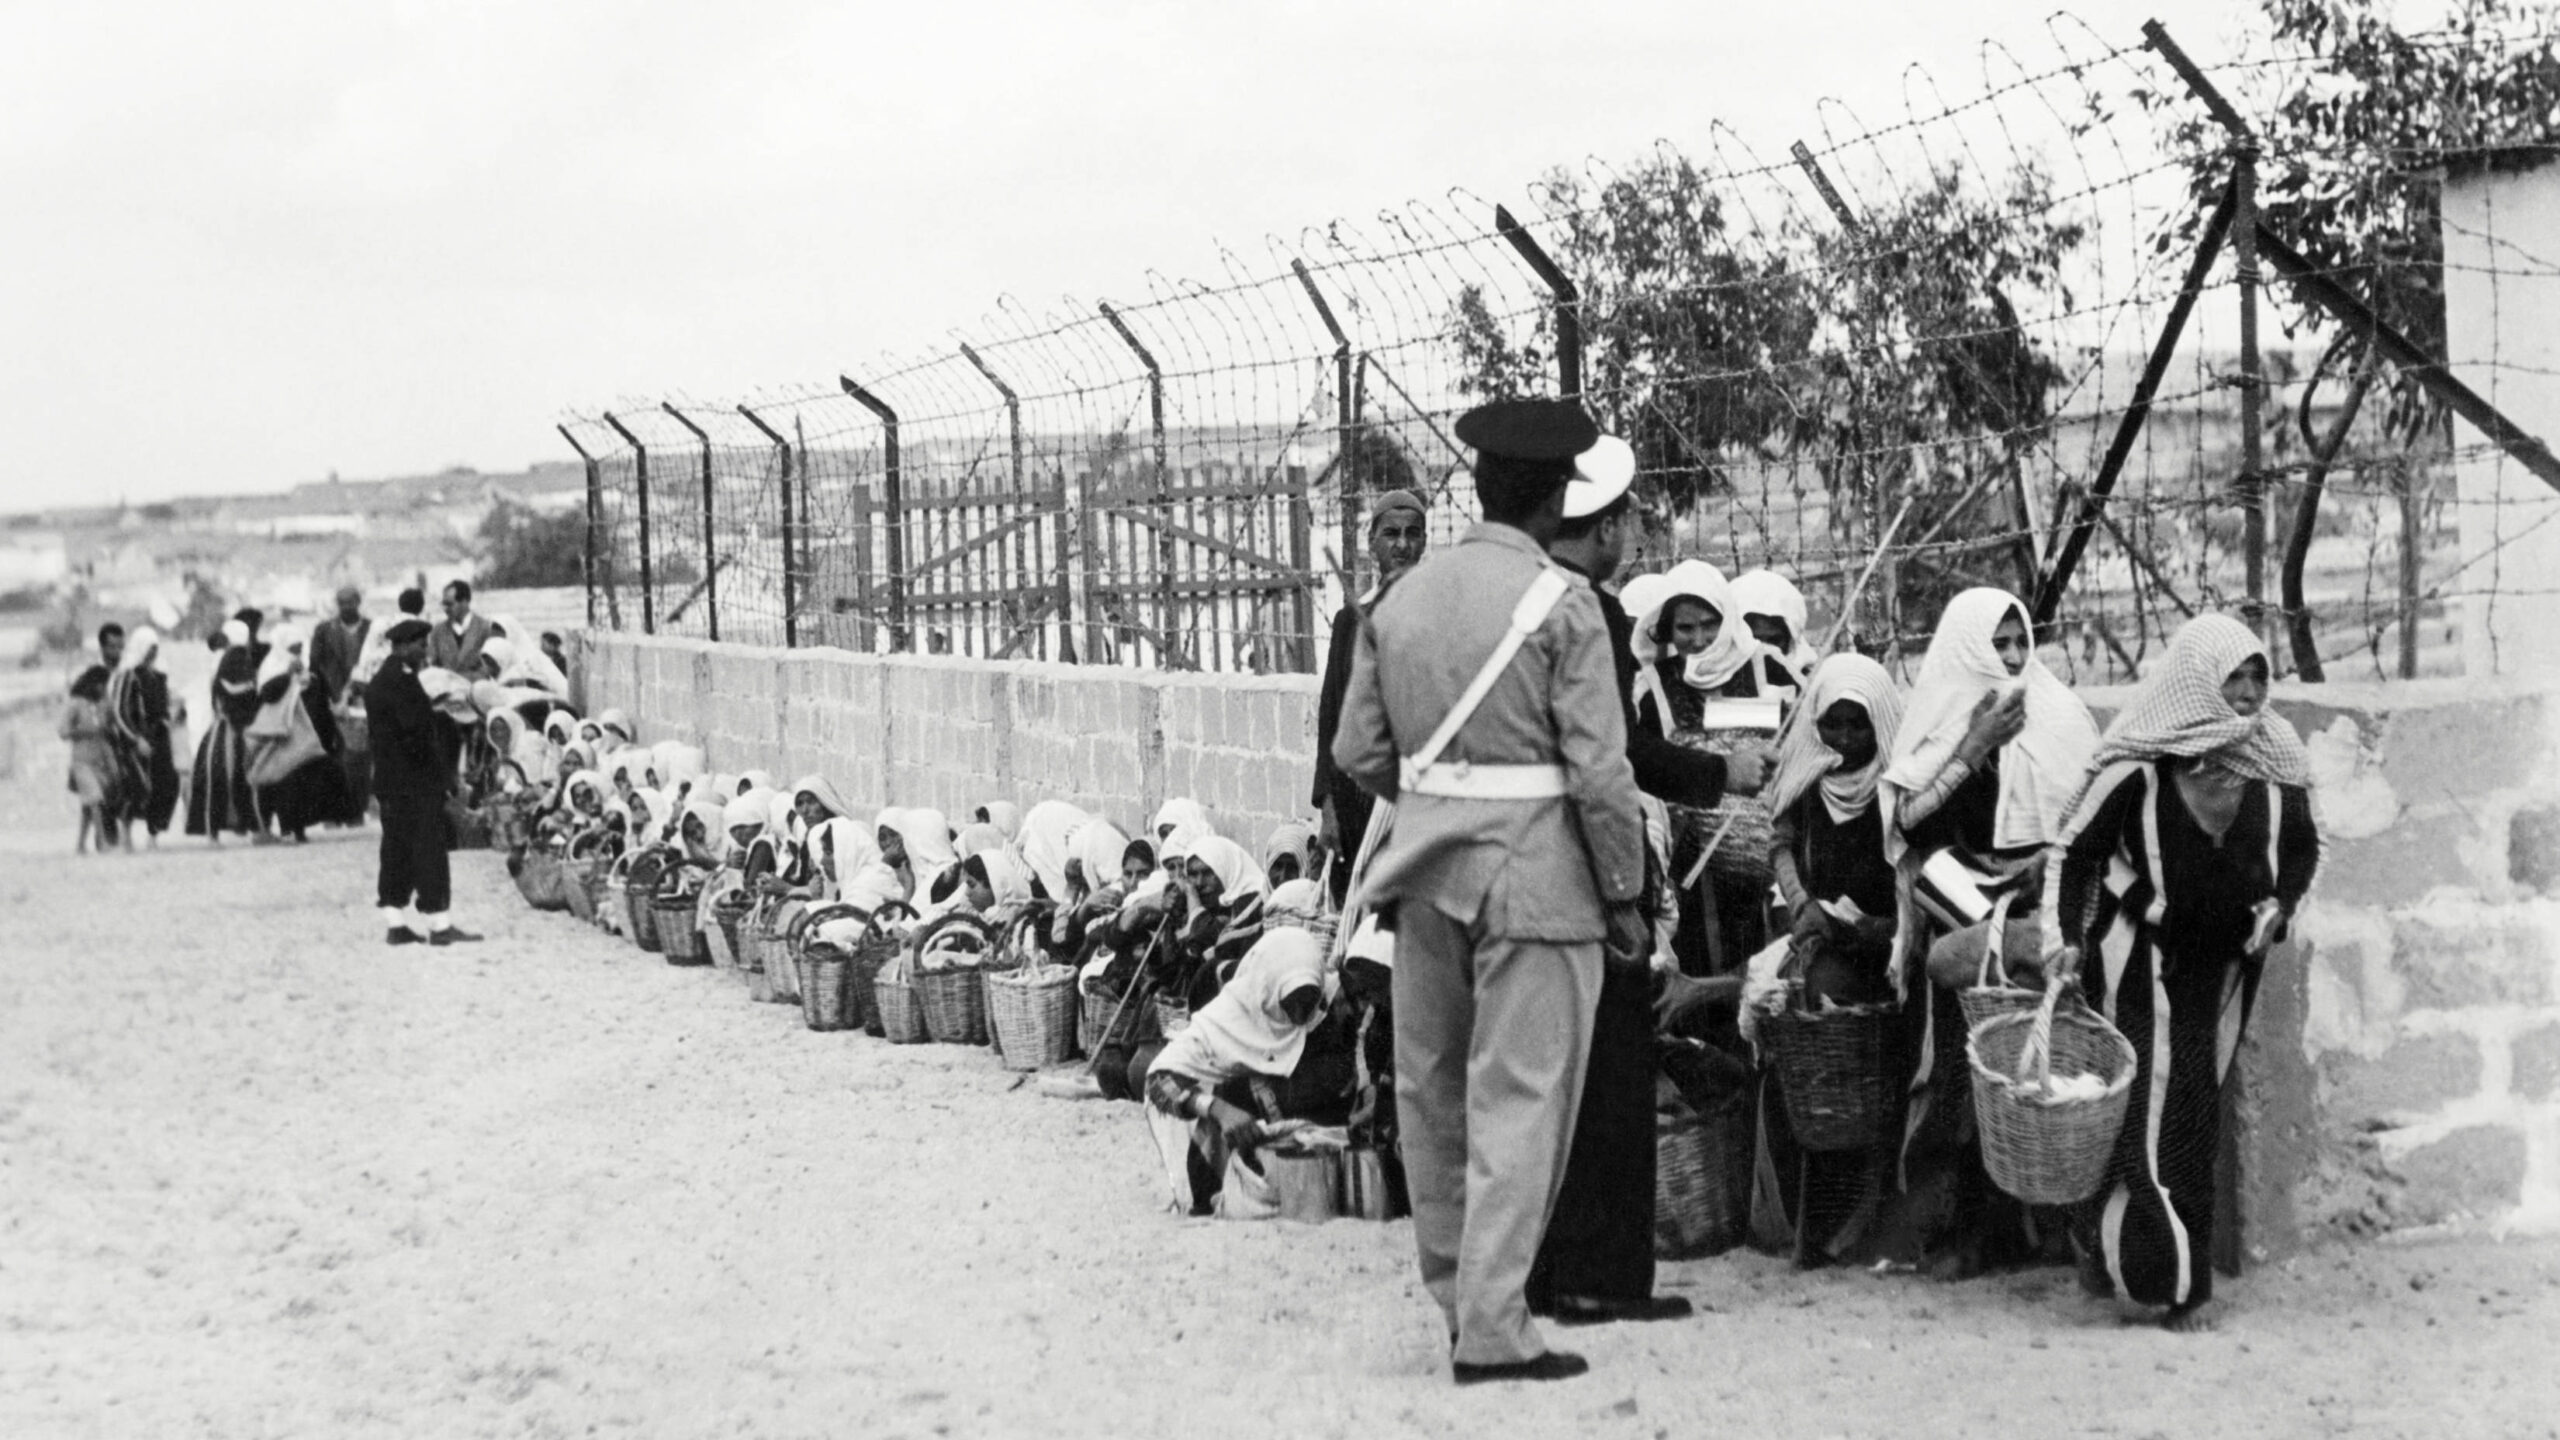 israel-palestine-war:-a-brief-history-of-refugee-camps-in-gaza